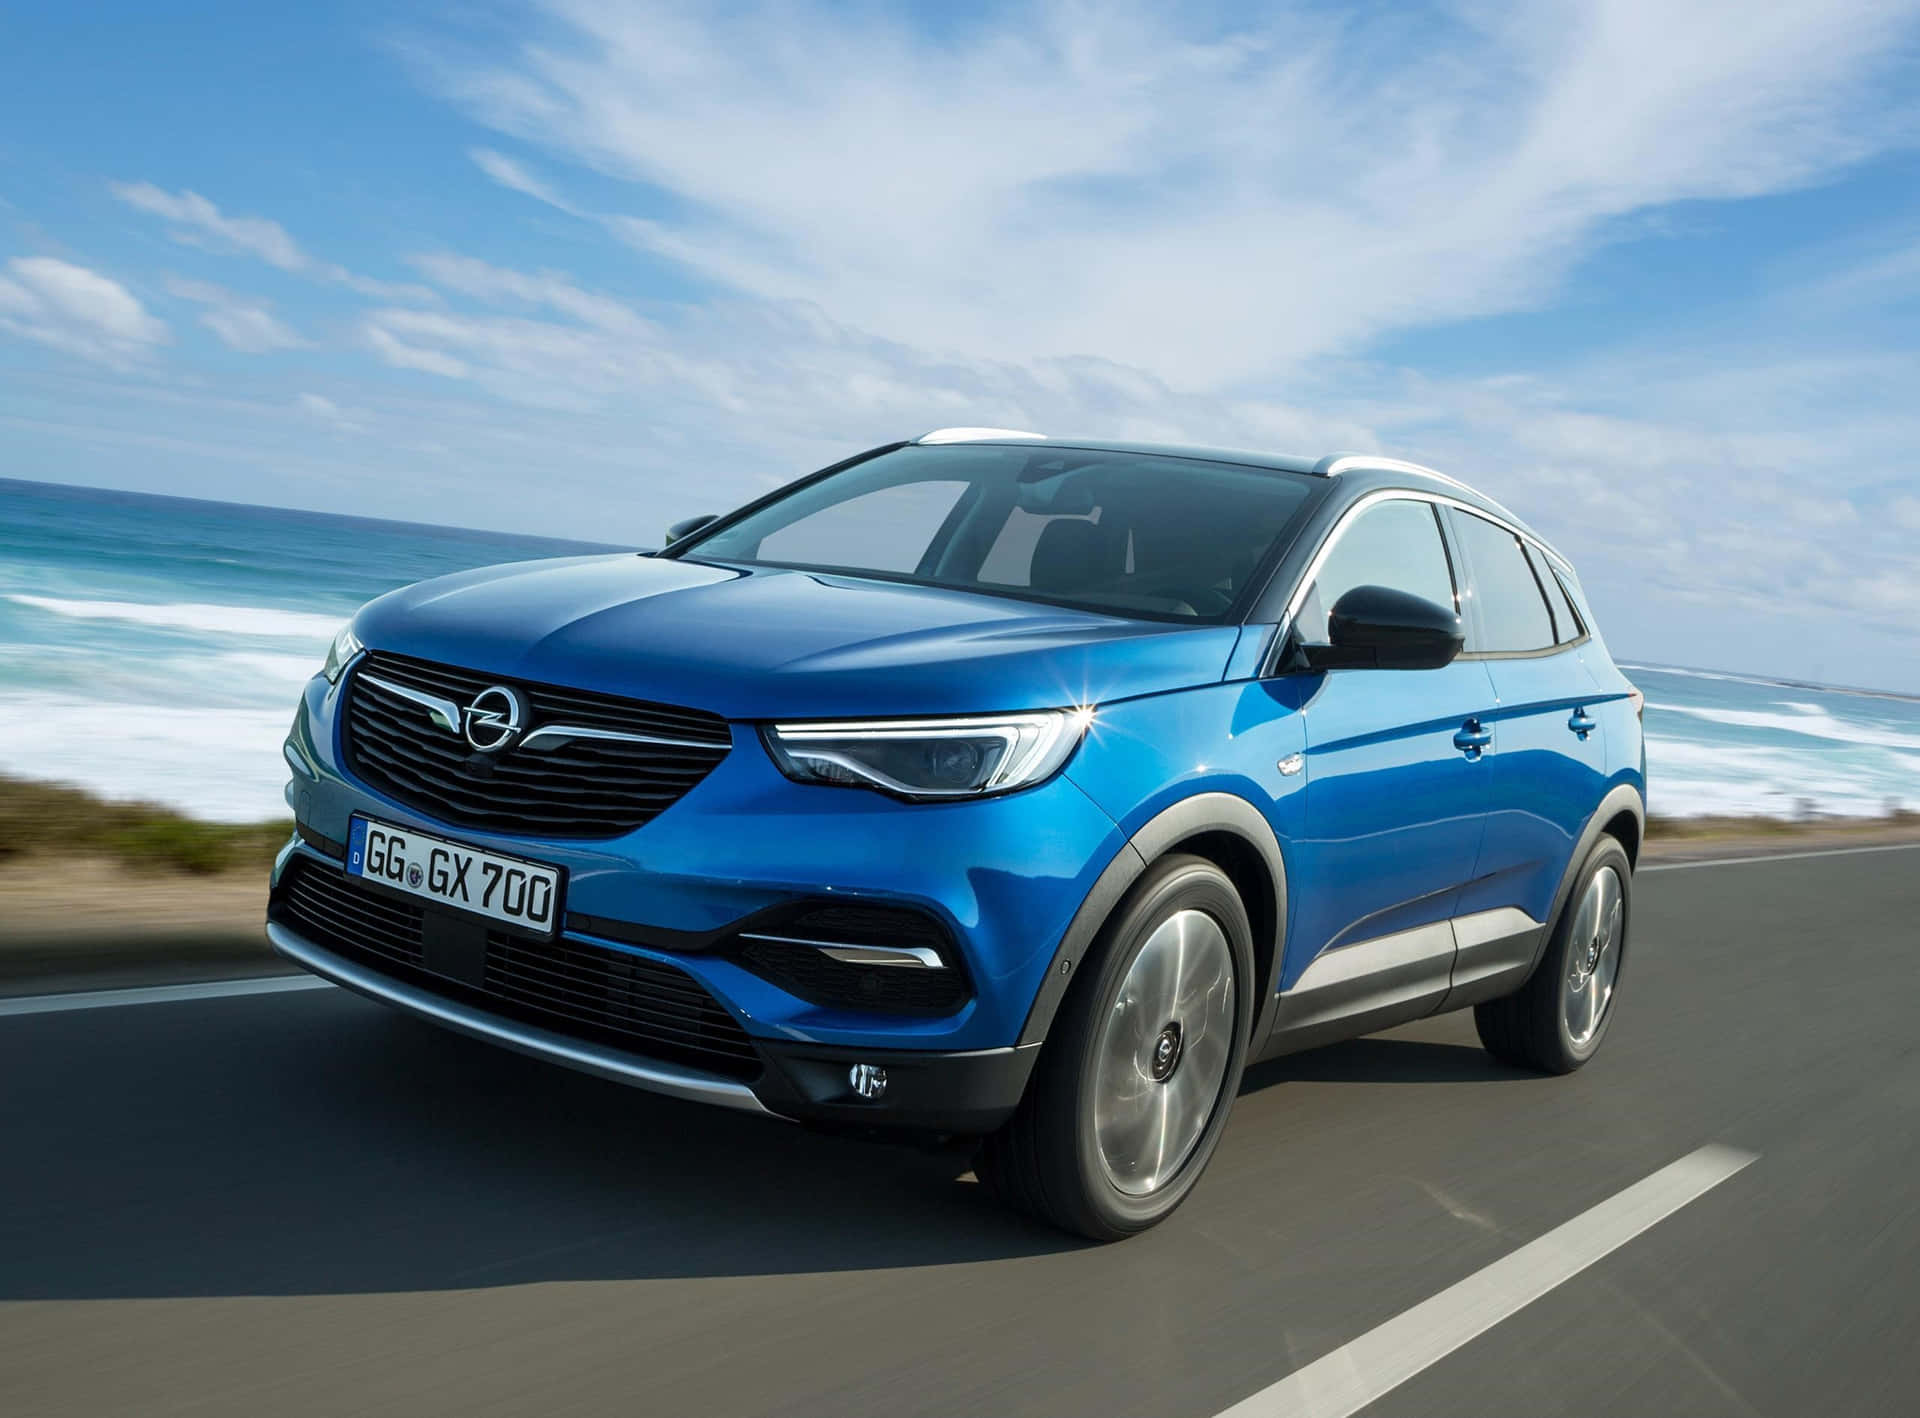 Download Sleek and Stylish Opel Grandland X in a Scenic Landscape